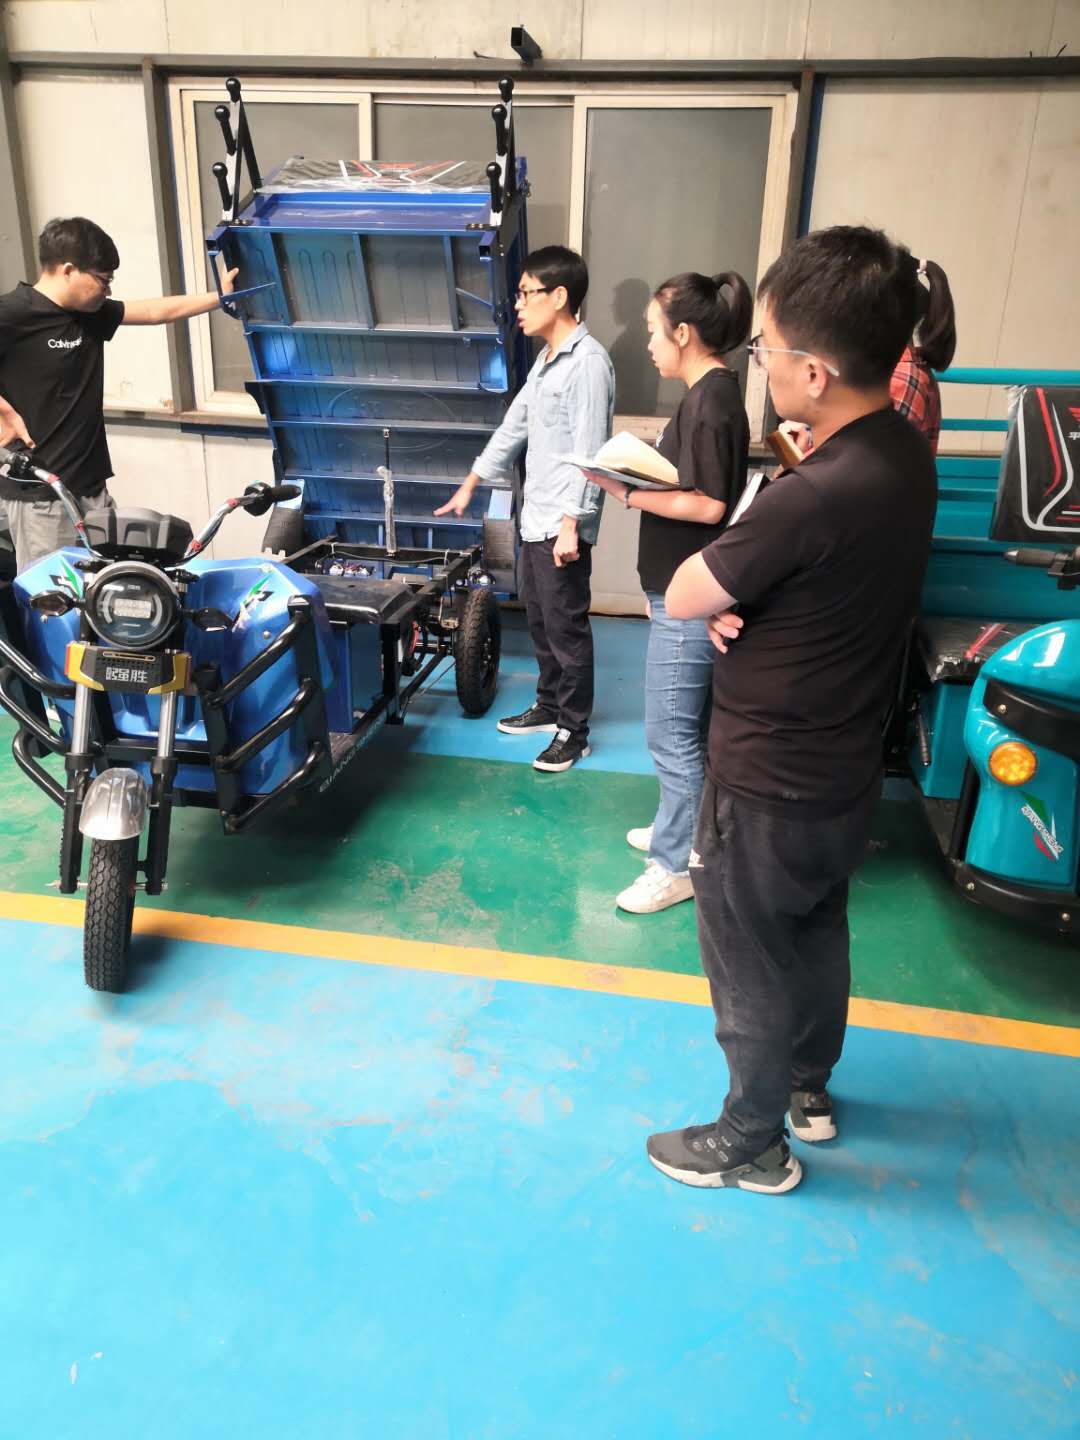 Super loading electric tricycle adult battery rickshaw loader made in China